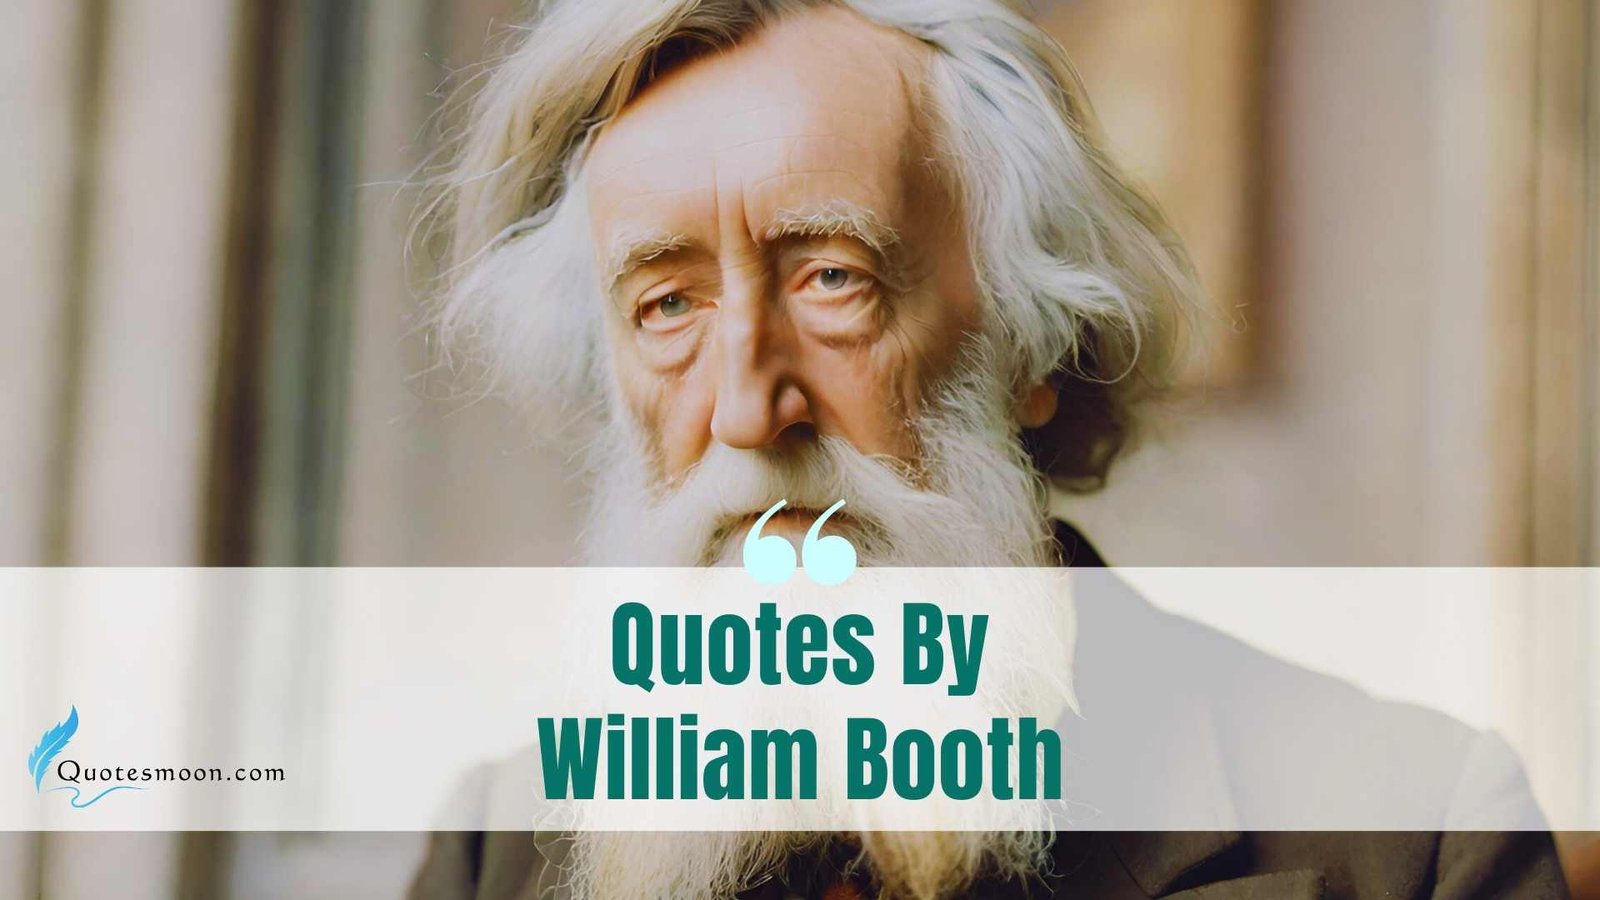 Quotes By William Booth images